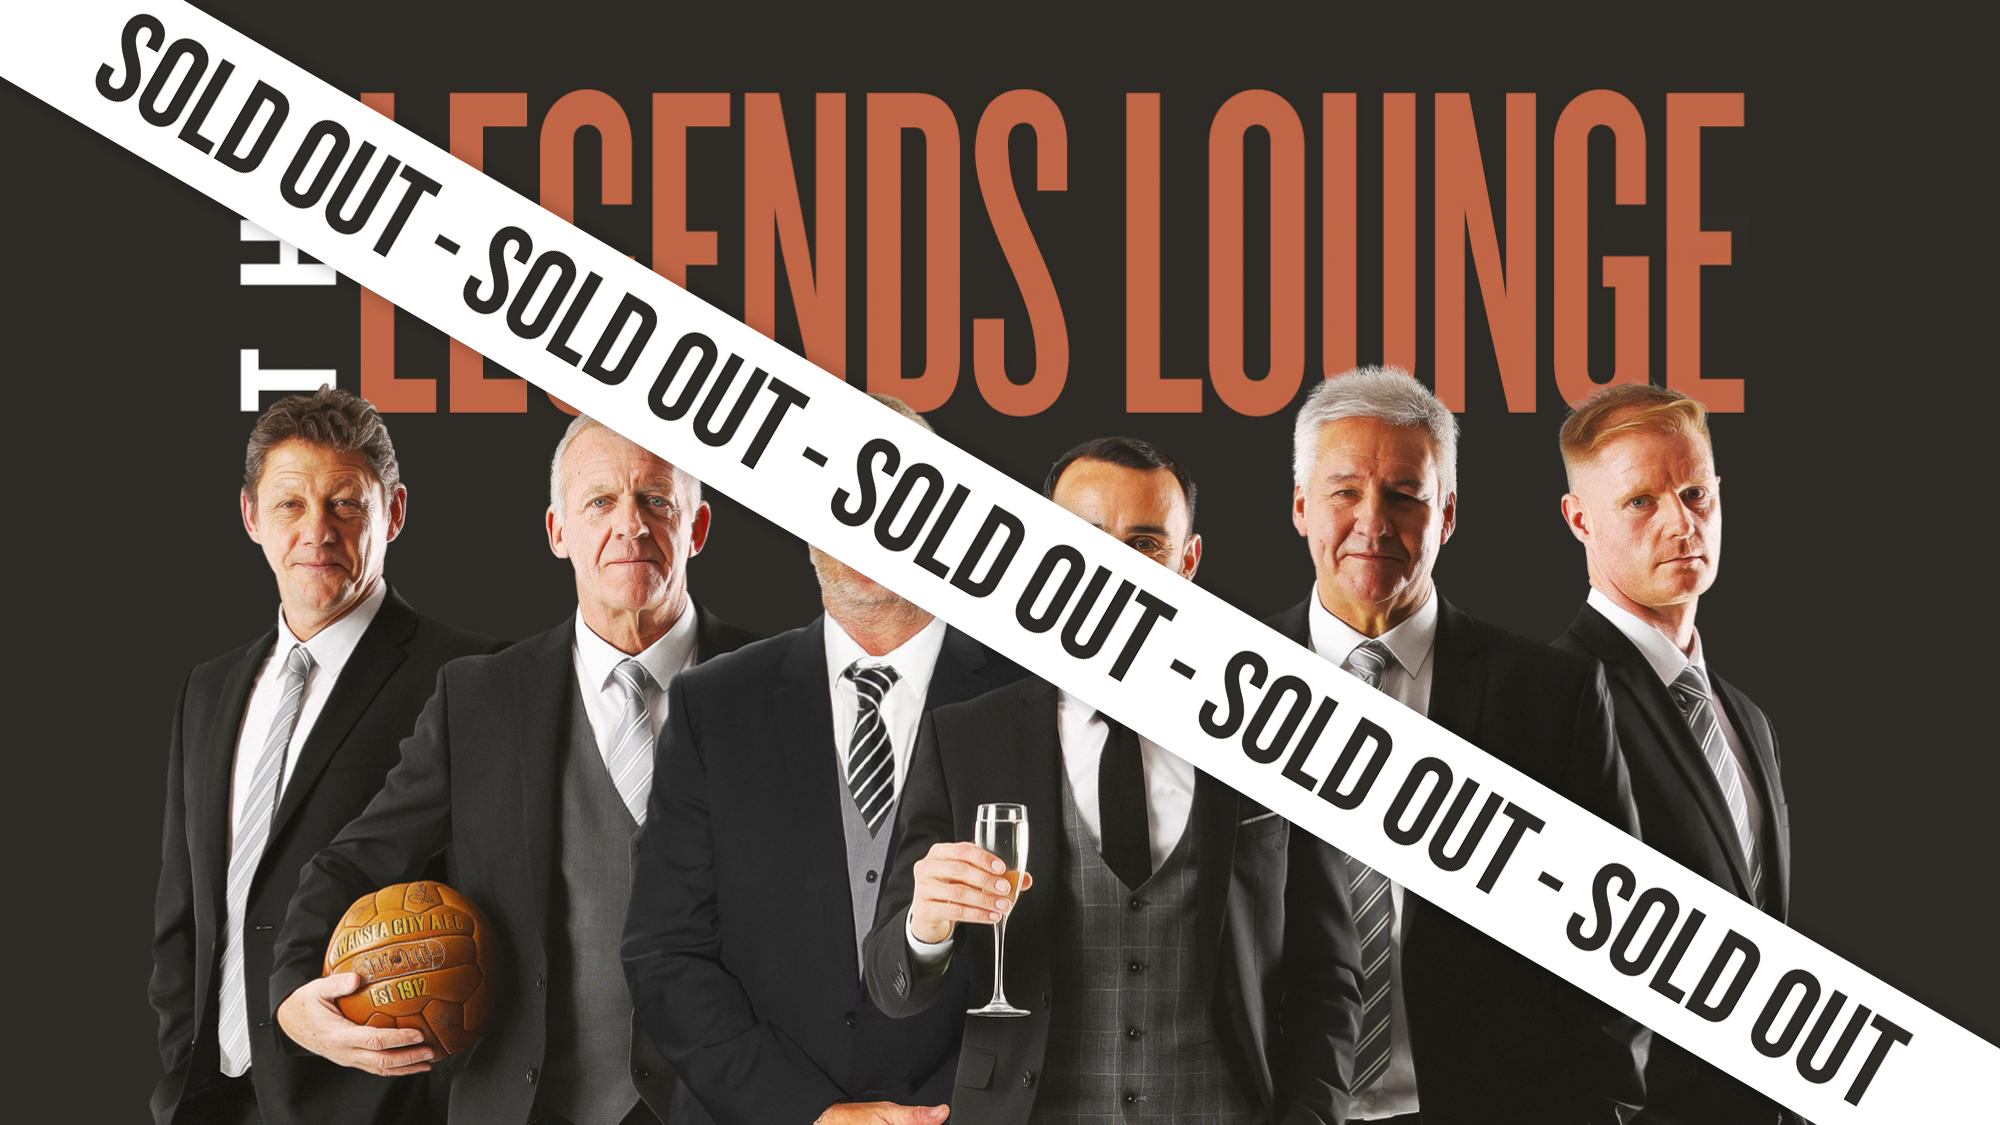 Legends Lounge Sold Out